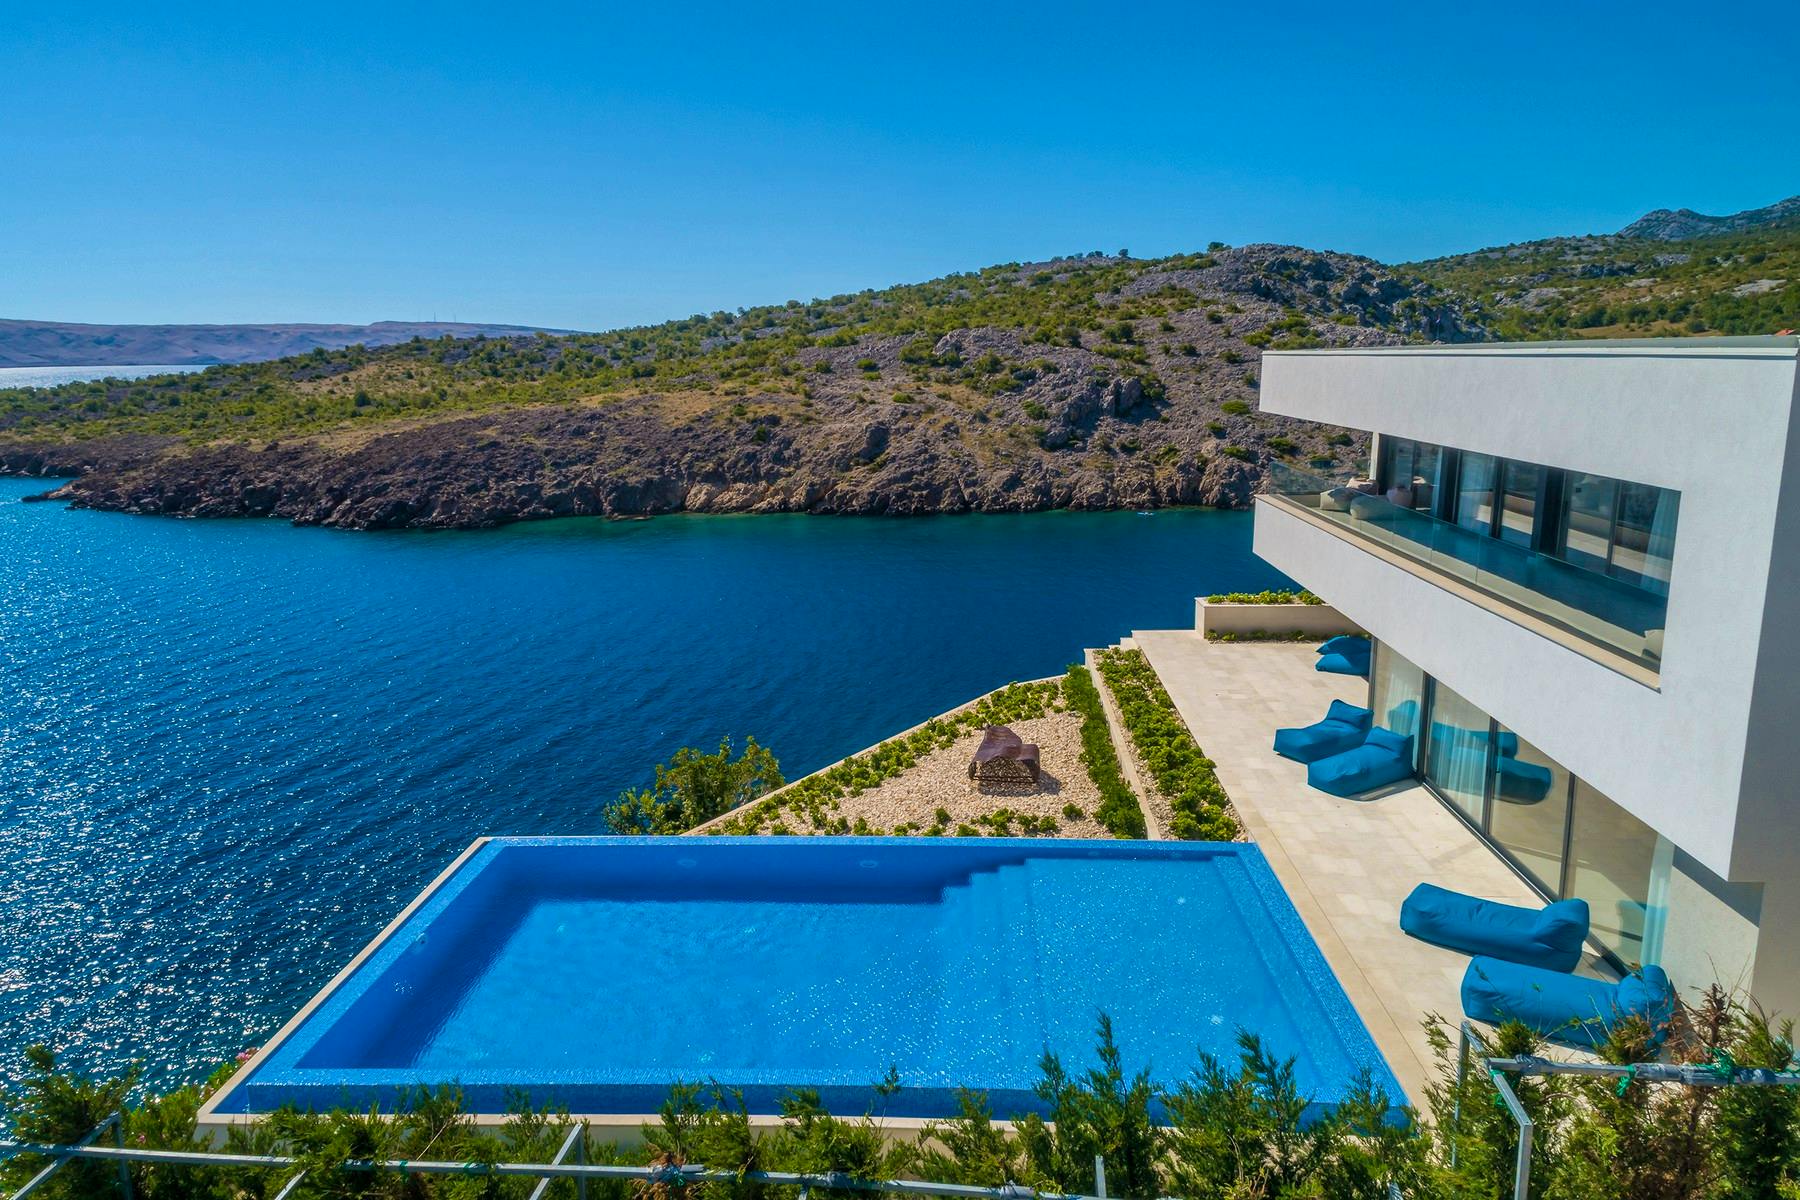 Modern villa on a cliff with a swimming pool overlooking the sea 